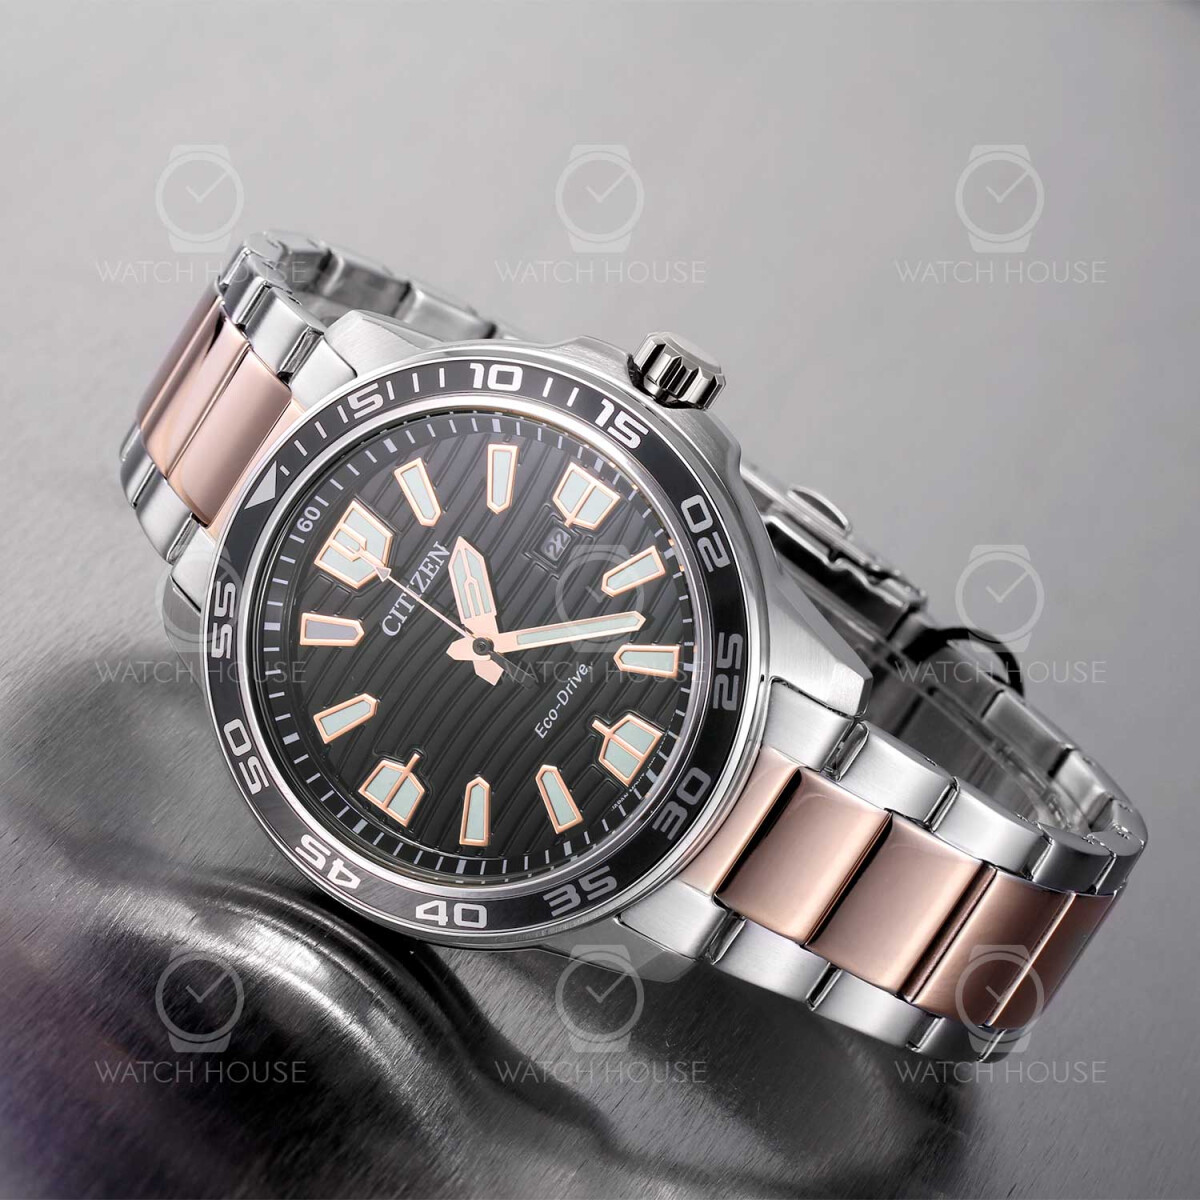 The Citizen AW1524-84E is the mens wristwatch of the...